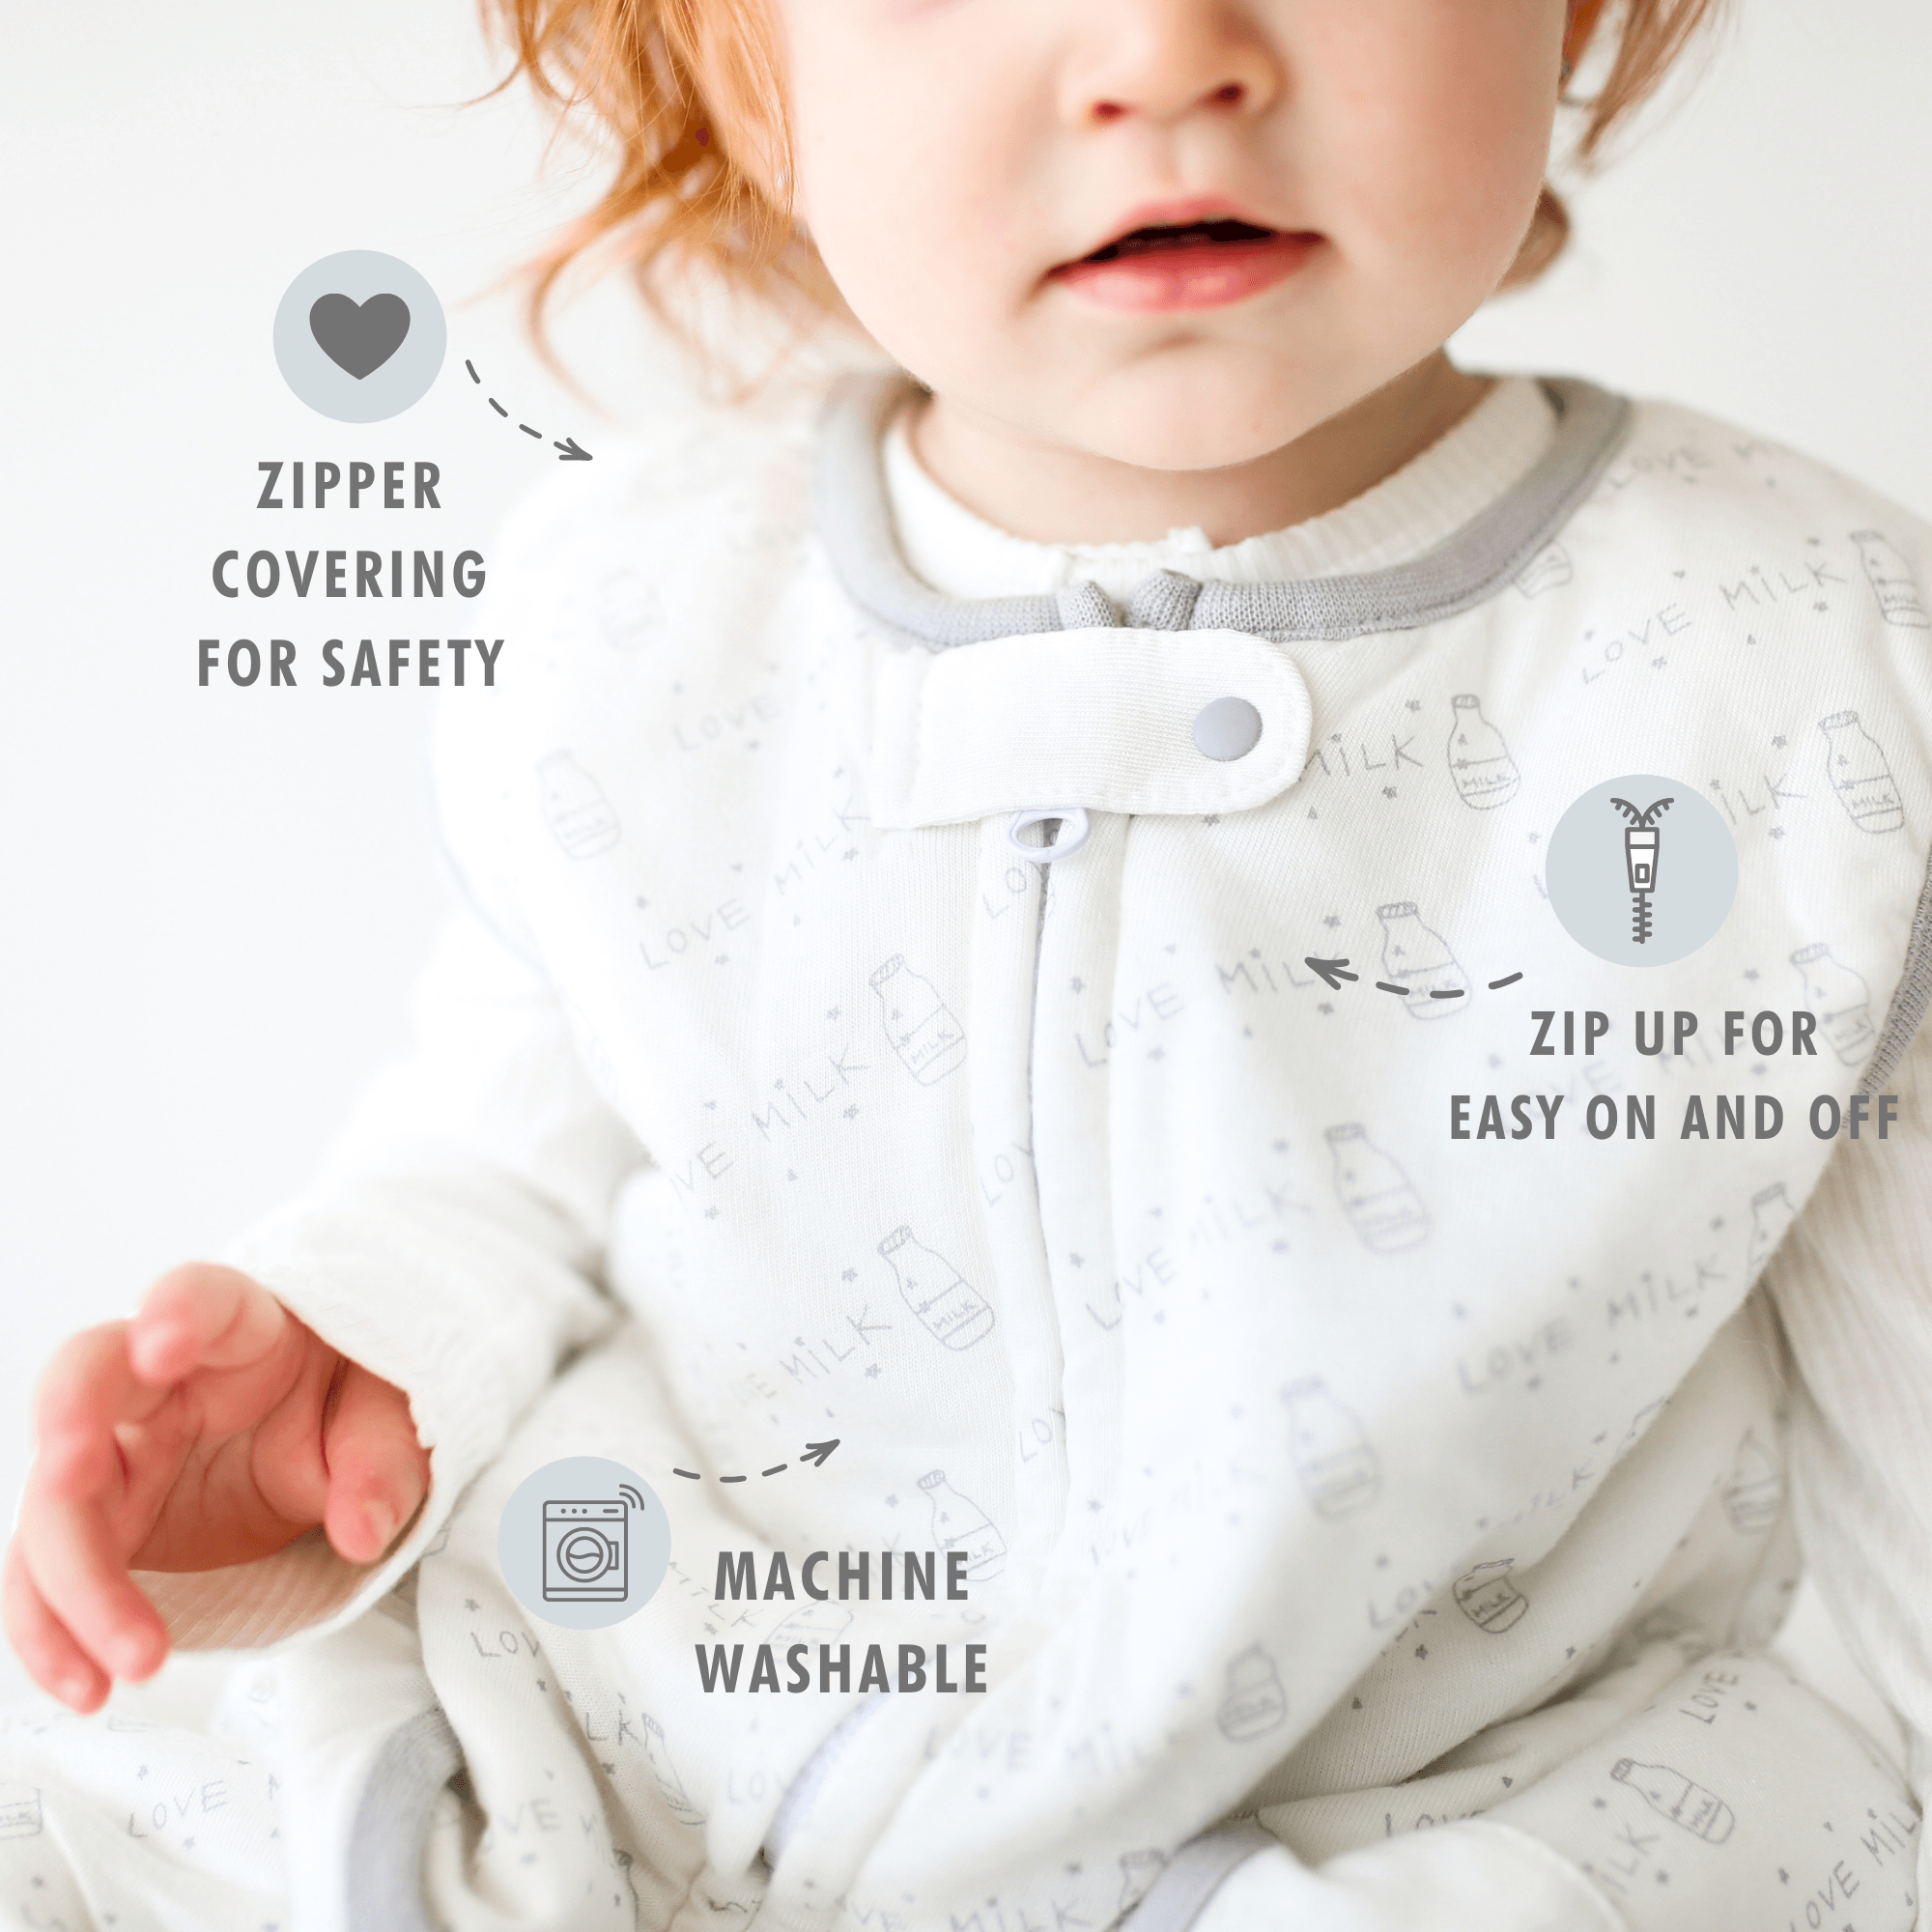 Tealbee Love Milk Dreamsuit - zipper covering for safety, zip up for easy on and off, machine washable